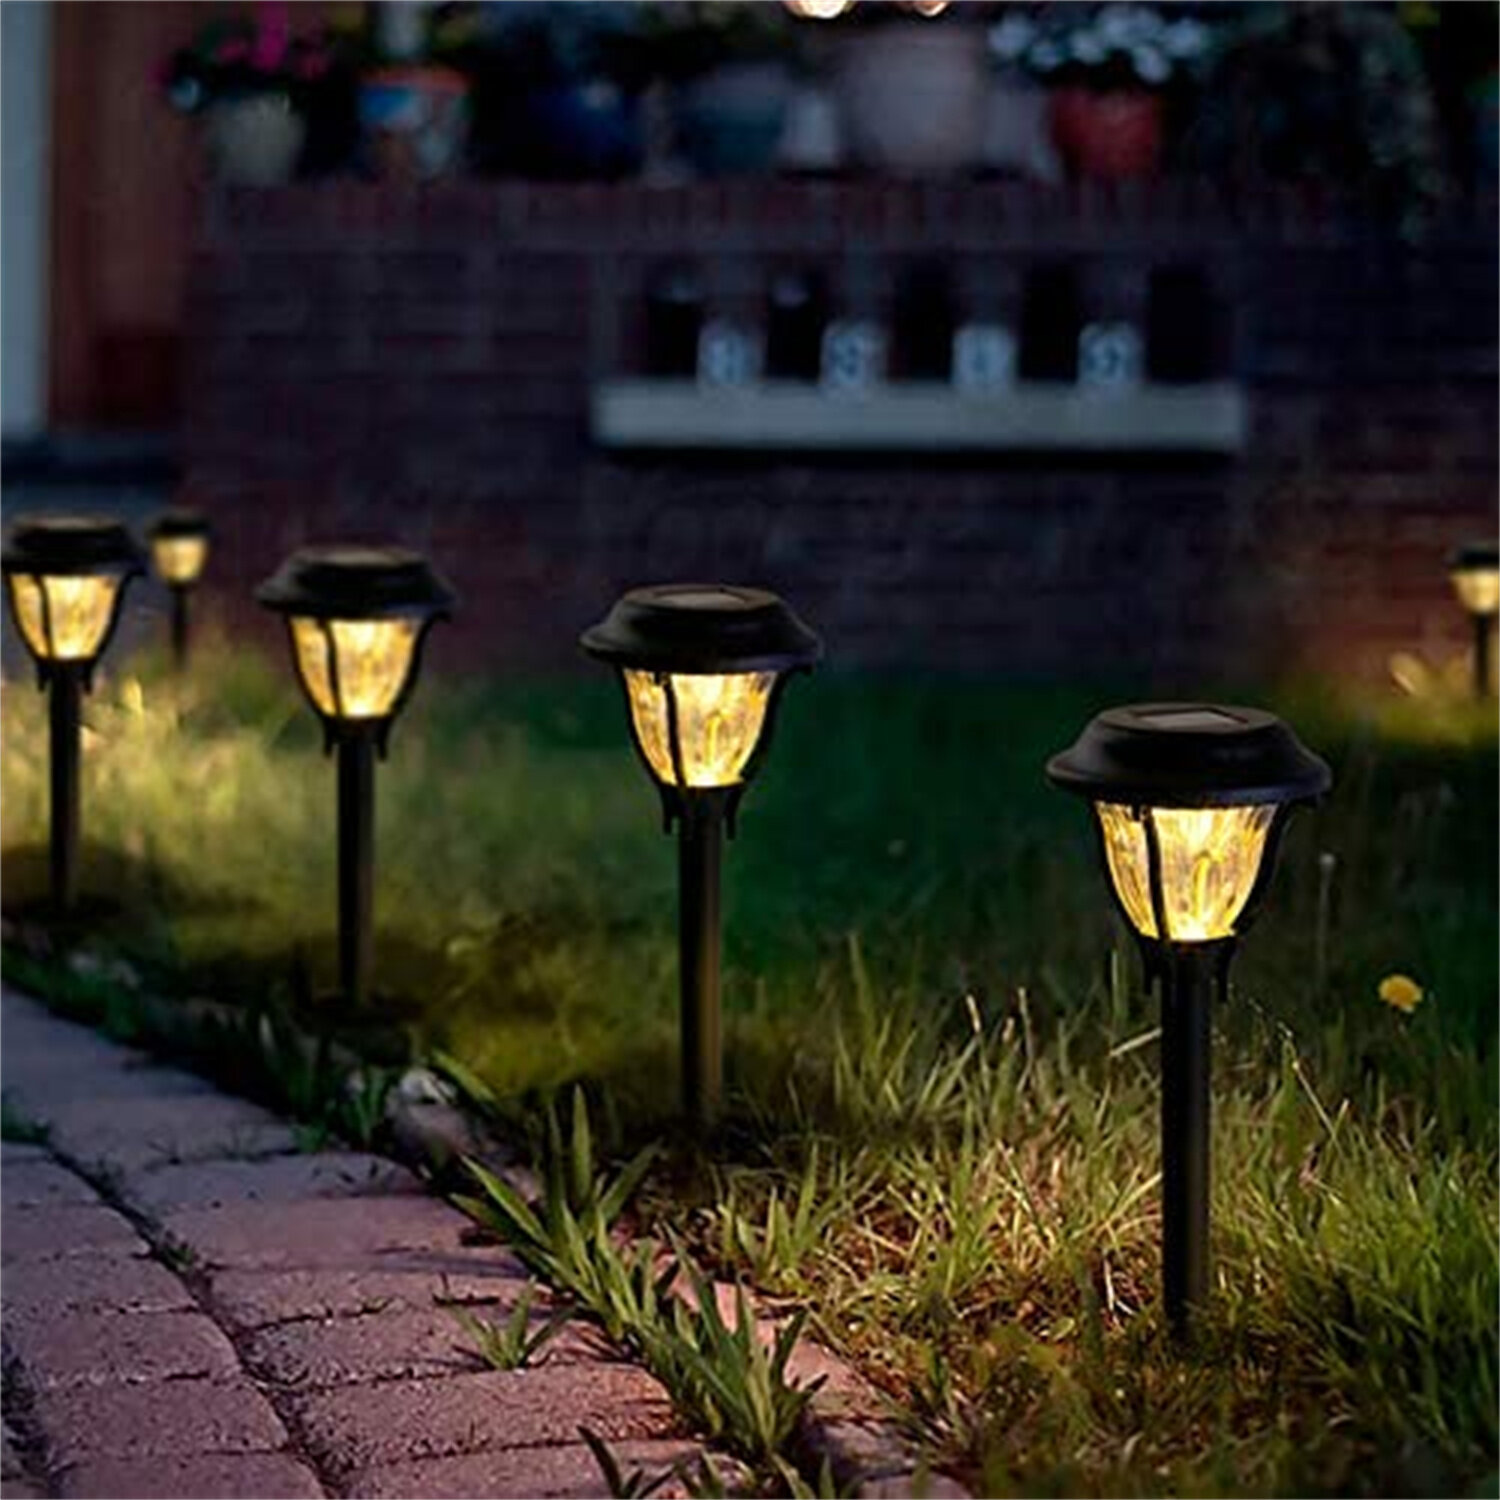 Stainless Steel IP44 Waterproof Auto On/Off Outdoor LED Pathway Landscape Solar Lights for Garden Cold White Yard … Patio Path and Walkway. GIGALUMI Solar Pathway Lights 12 Pack